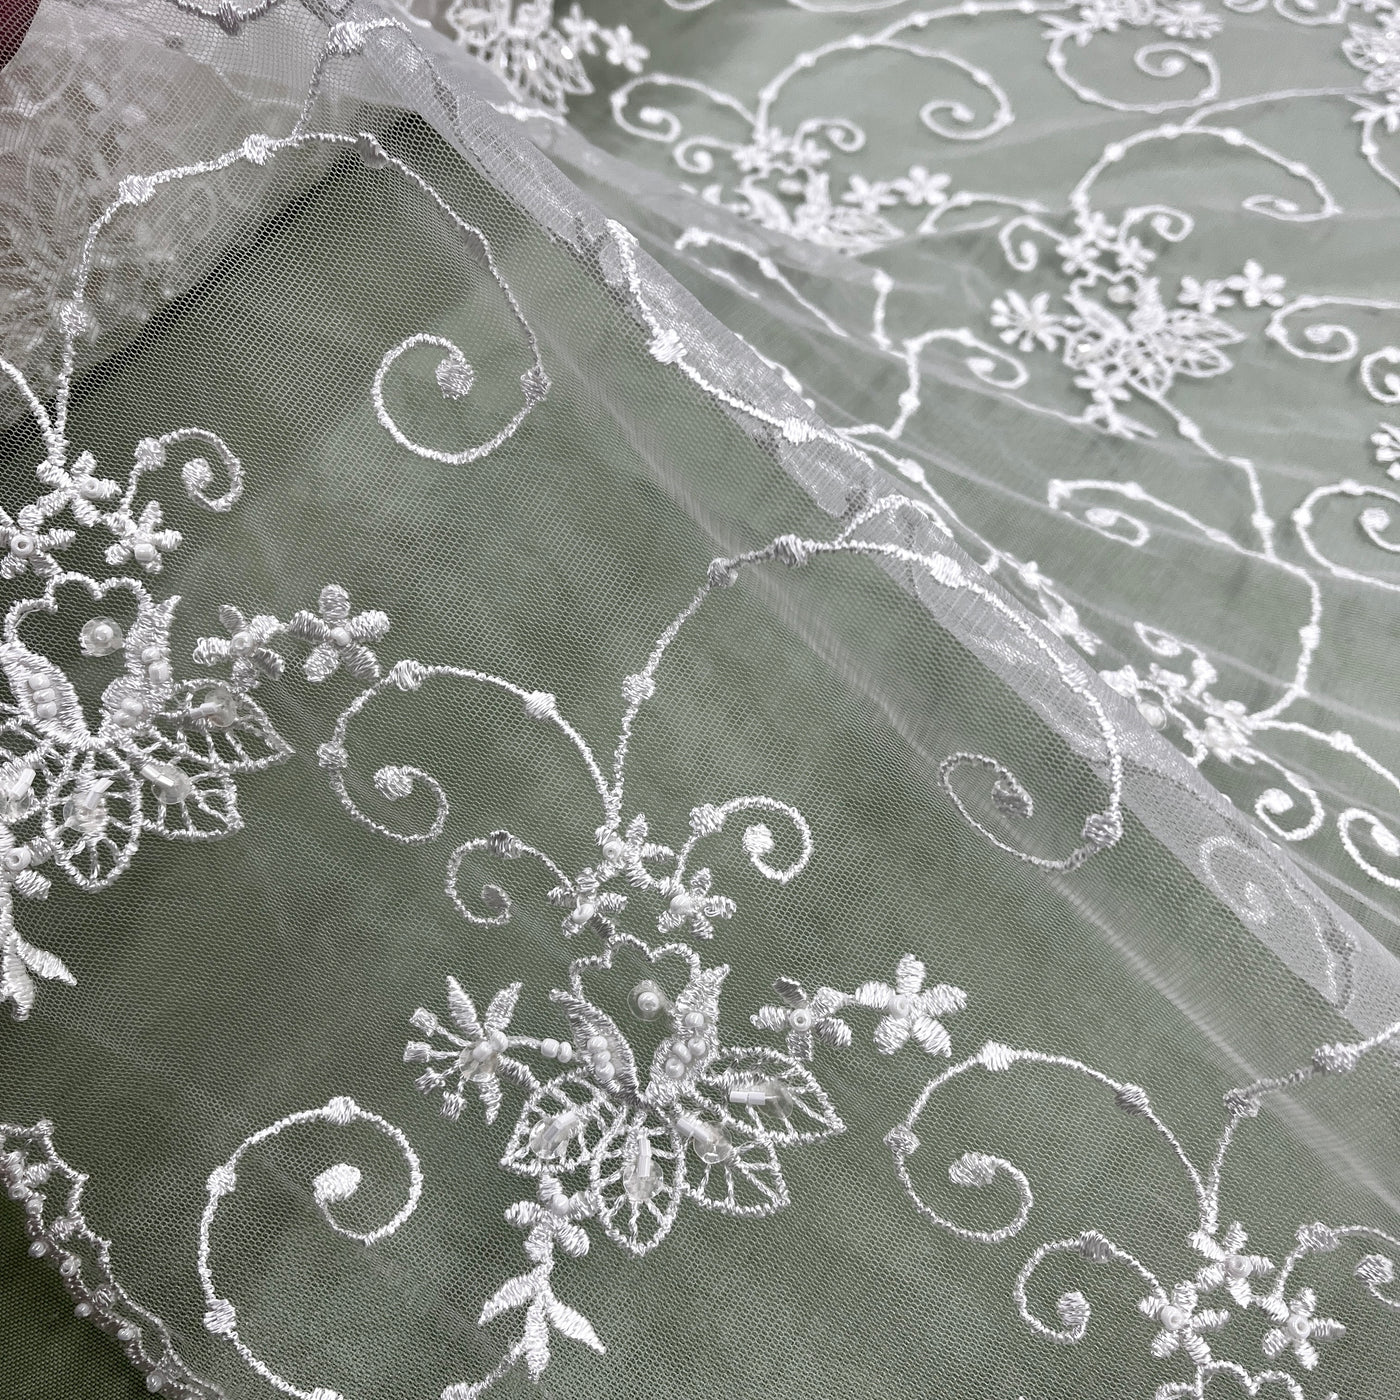 Beaded Lace Fabric Embroidered on 100% Polyester Net Mesh | Lace USA - 31094W-BP